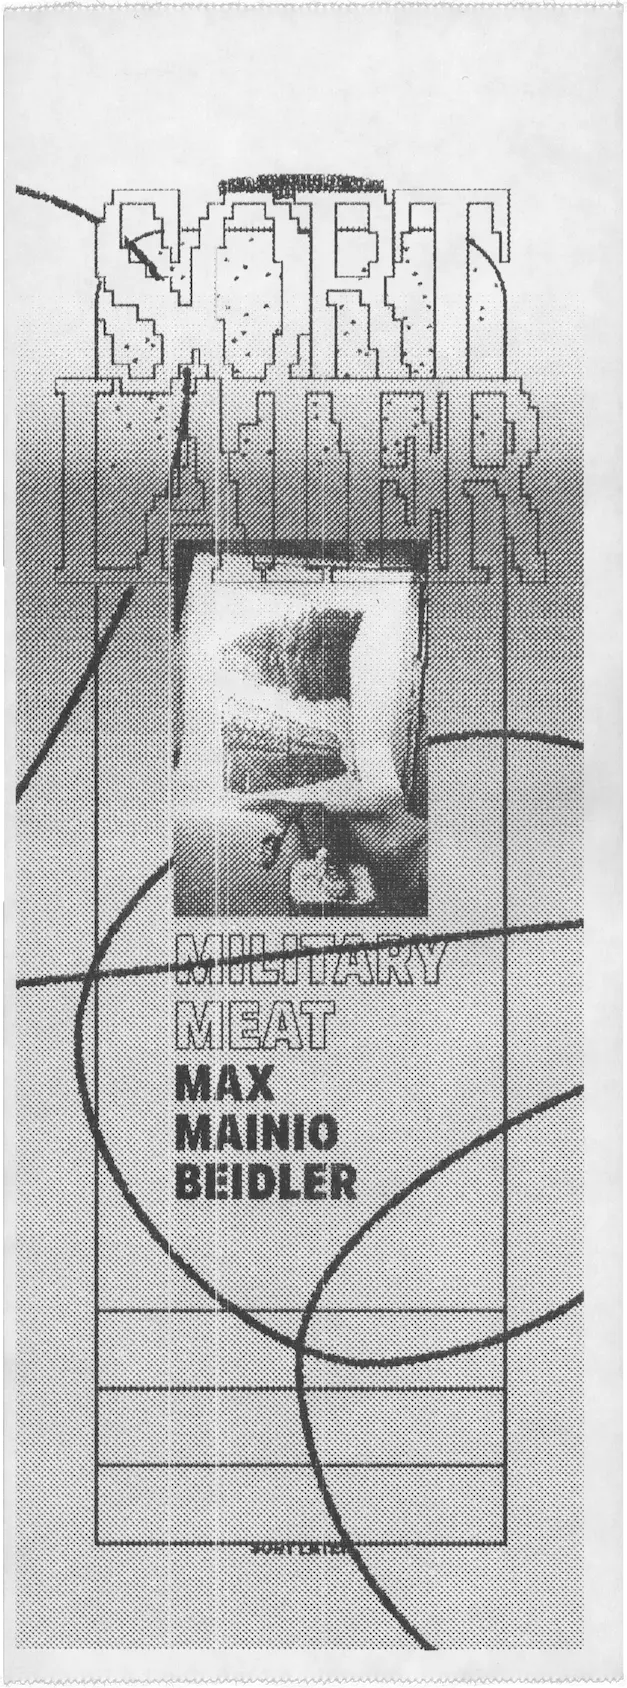 Poster? Maybe a flyer? generated on the Sort Later website featuring work by yours truly, entitled Military Meat, printed on receipt paper using a receipt printer. Really goes to show this website will generate content that can be printed at any size with any kind of printer.